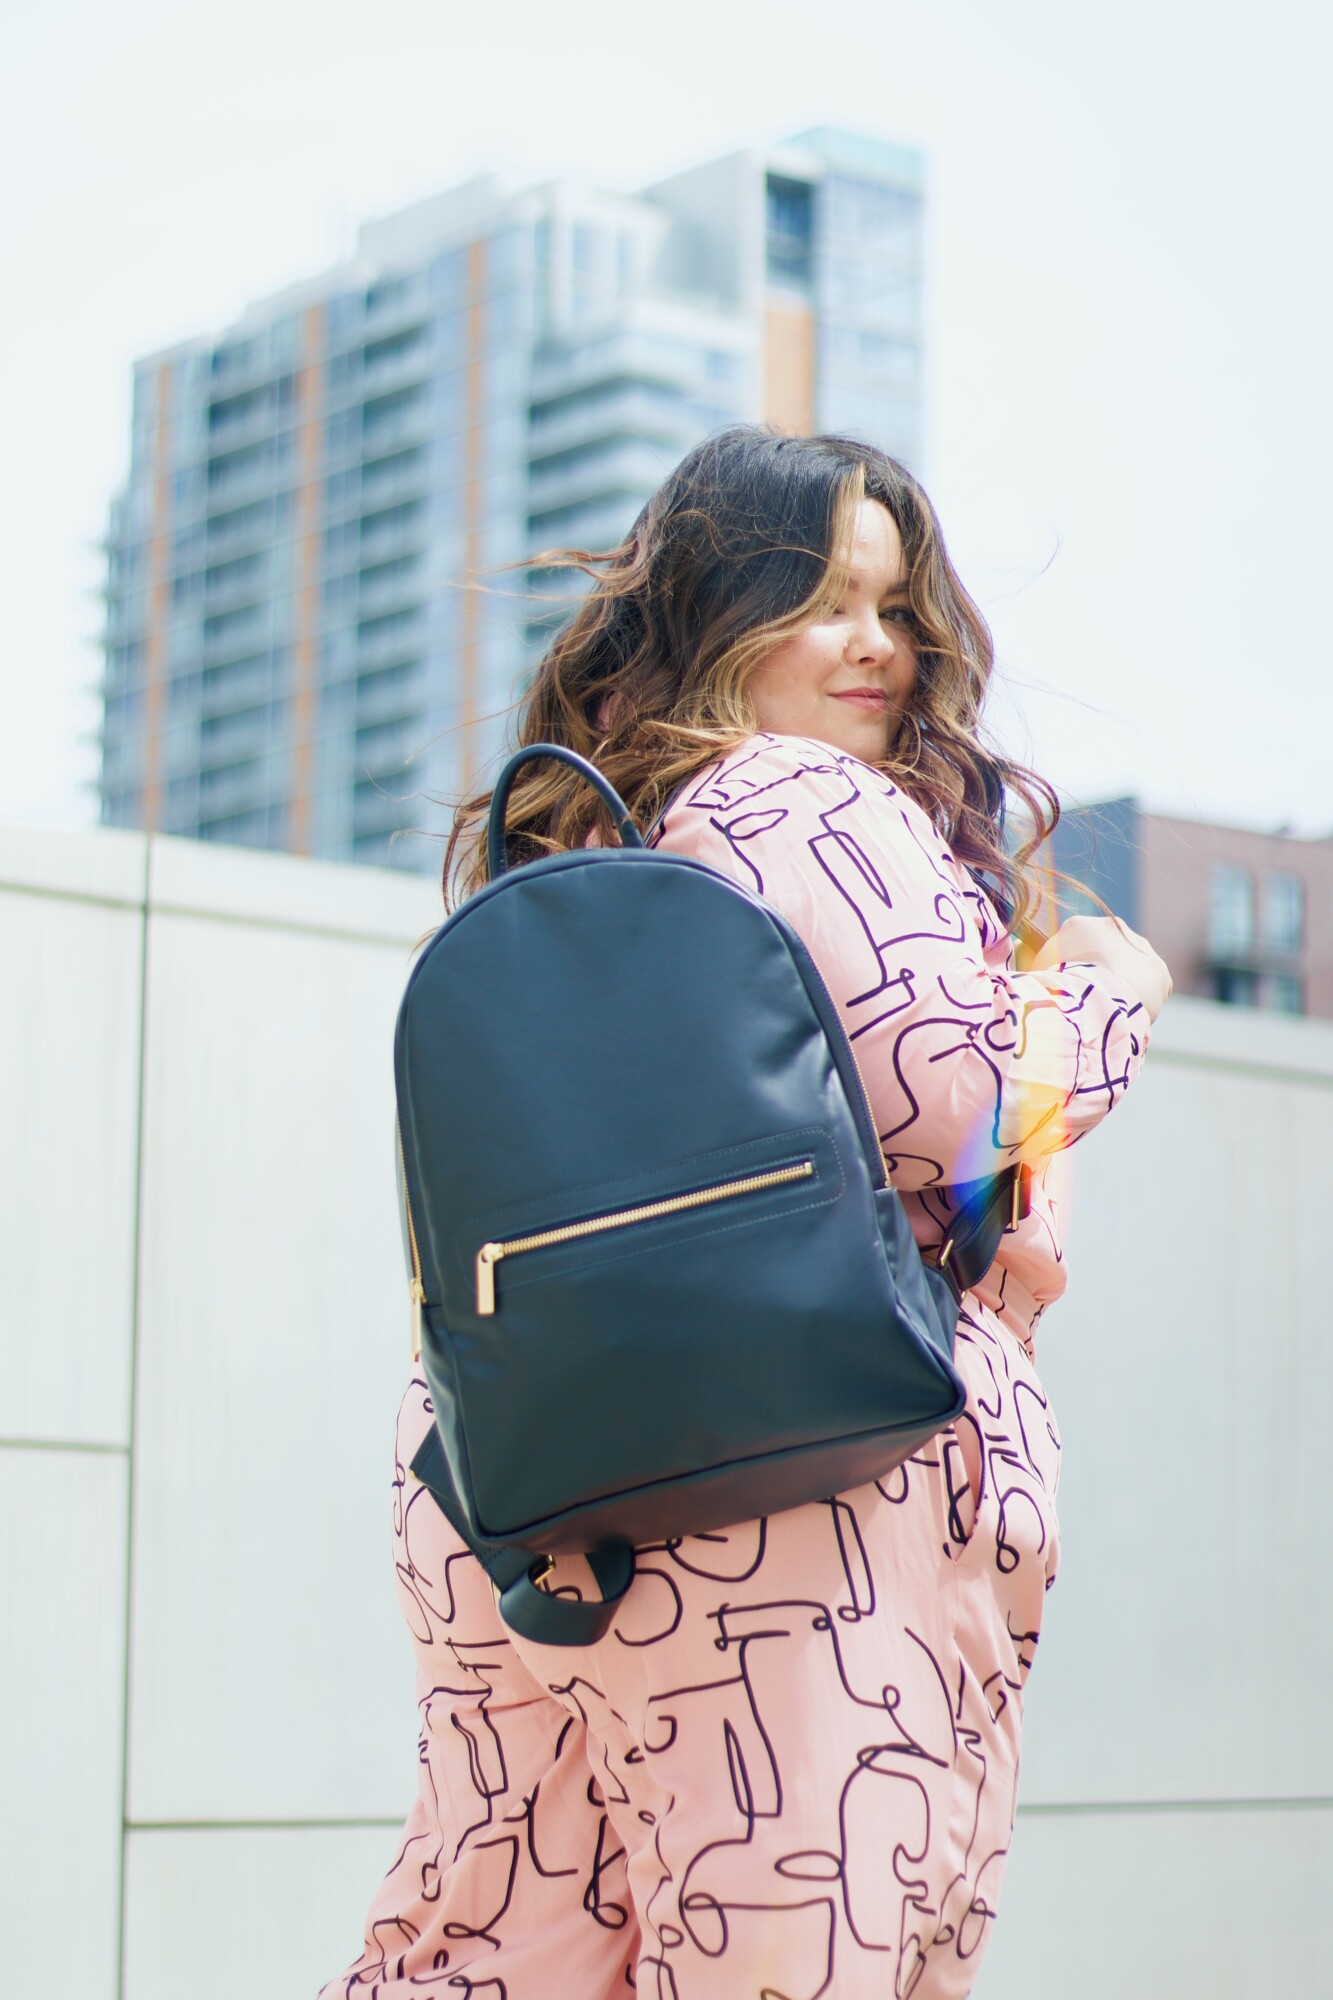 petite plus size fashion blogger and influencer Natalie in the City wears Eloquii and a Laudi Vidni backpack in Chicago.